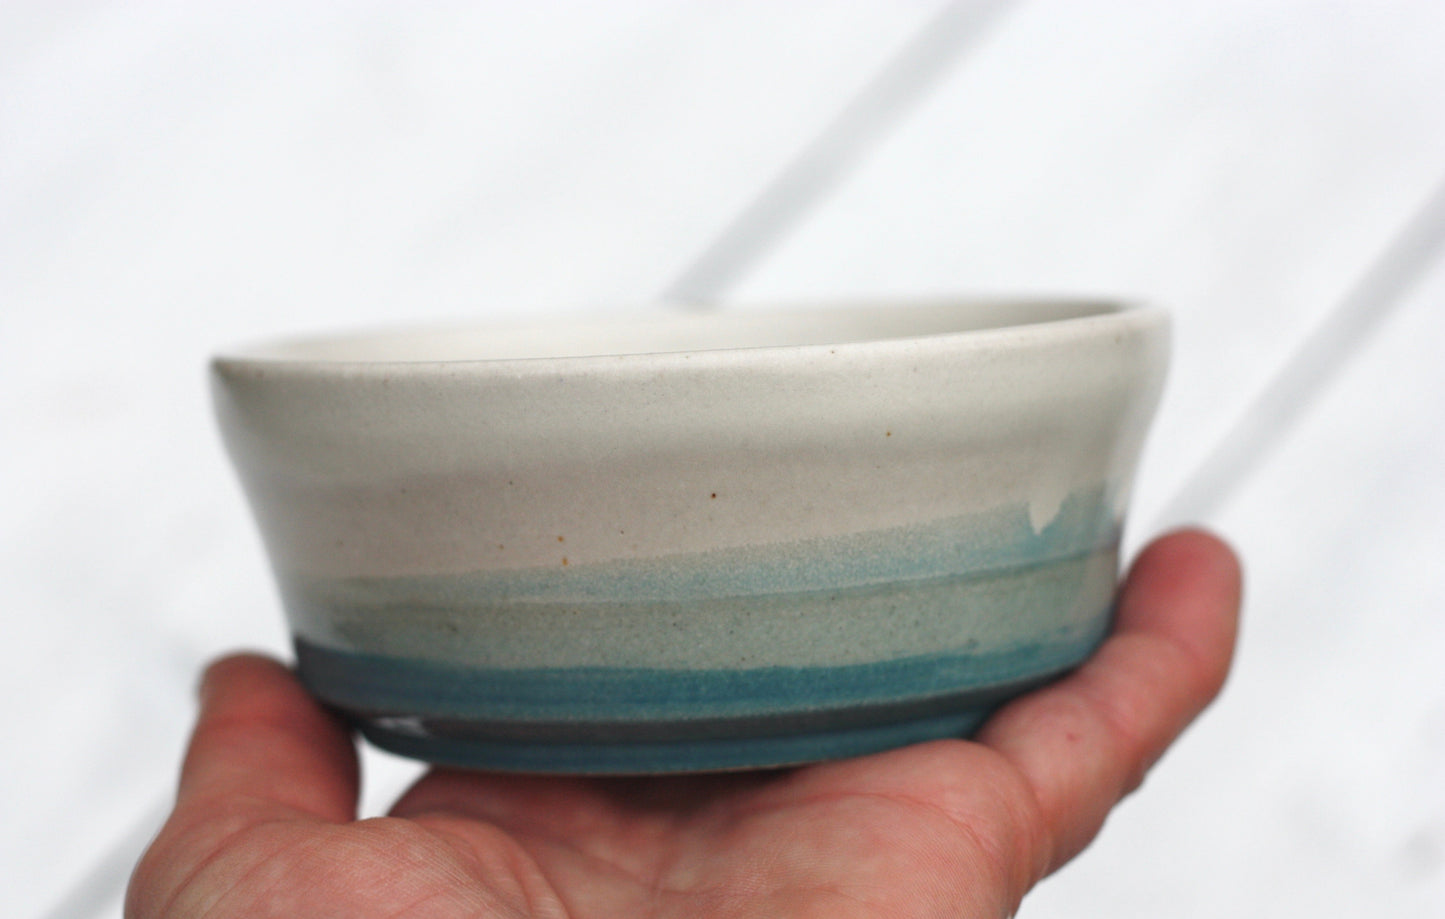 Tapas or Olive Dishes in White Blue and Soft Blue glazes